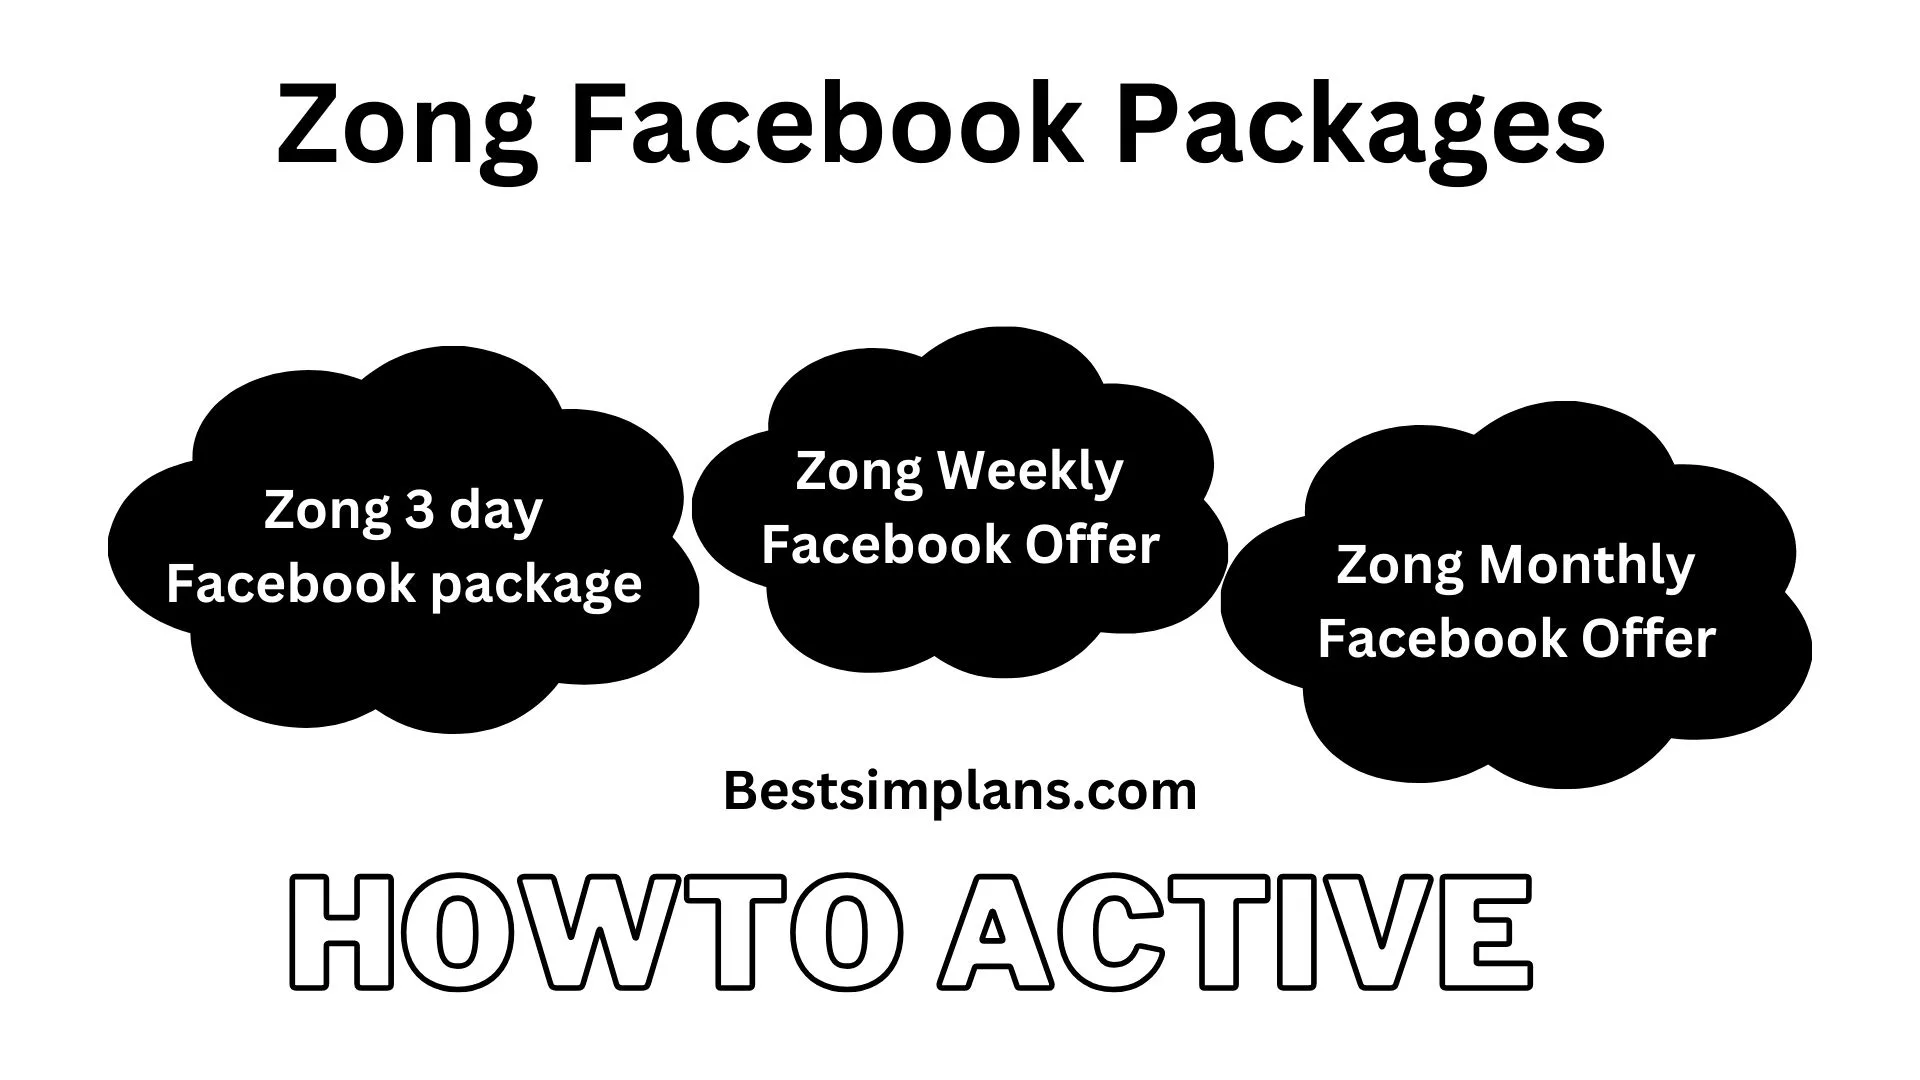 Zong Facebook Packages 1 day 3 day 7 Day and 30 days